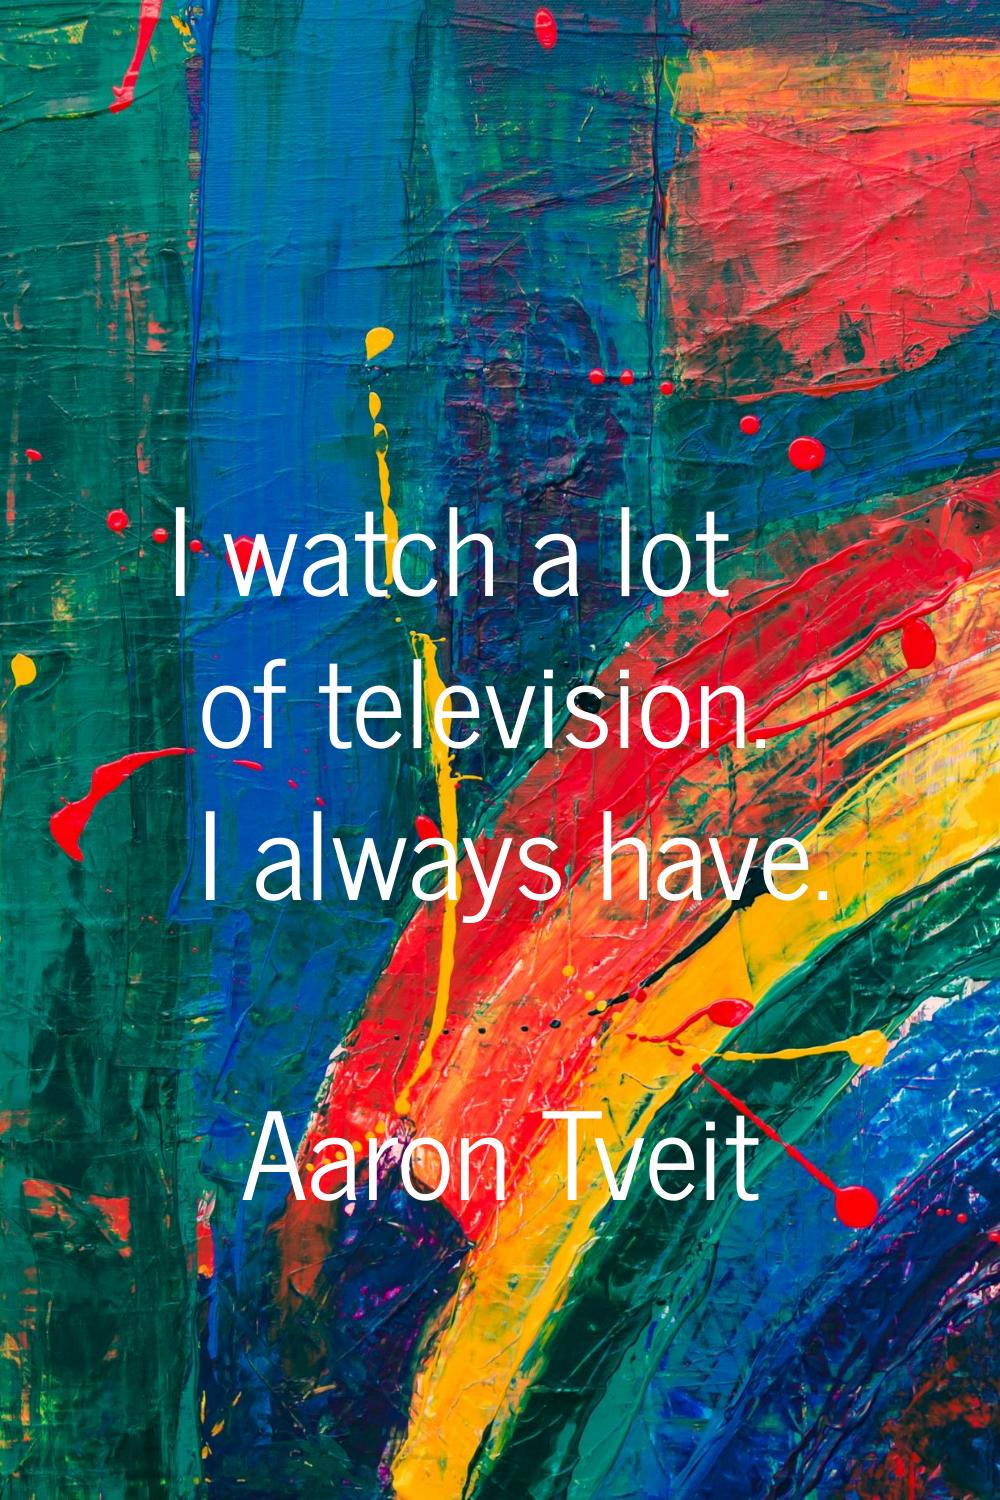 I watch a lot of television. I always have.